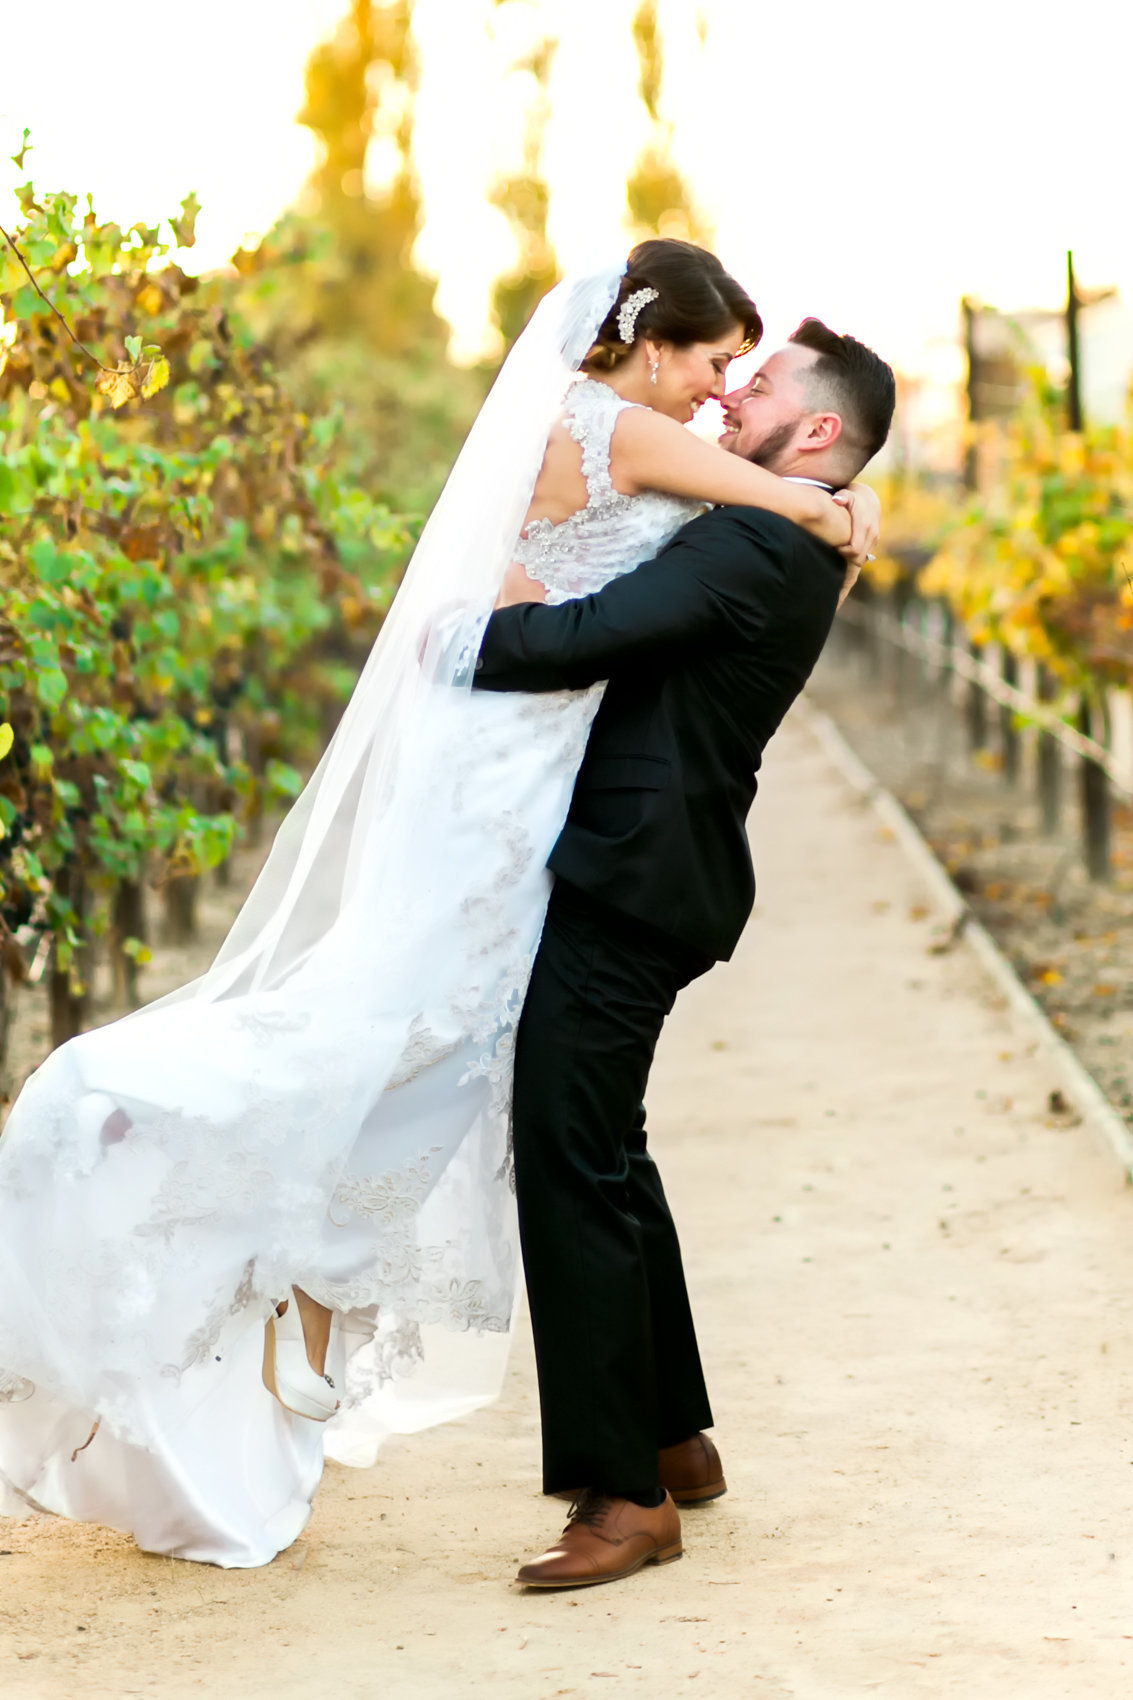 Picture of couple on wedding day at Turnip Rose in Costa Mesa wedding vineyards